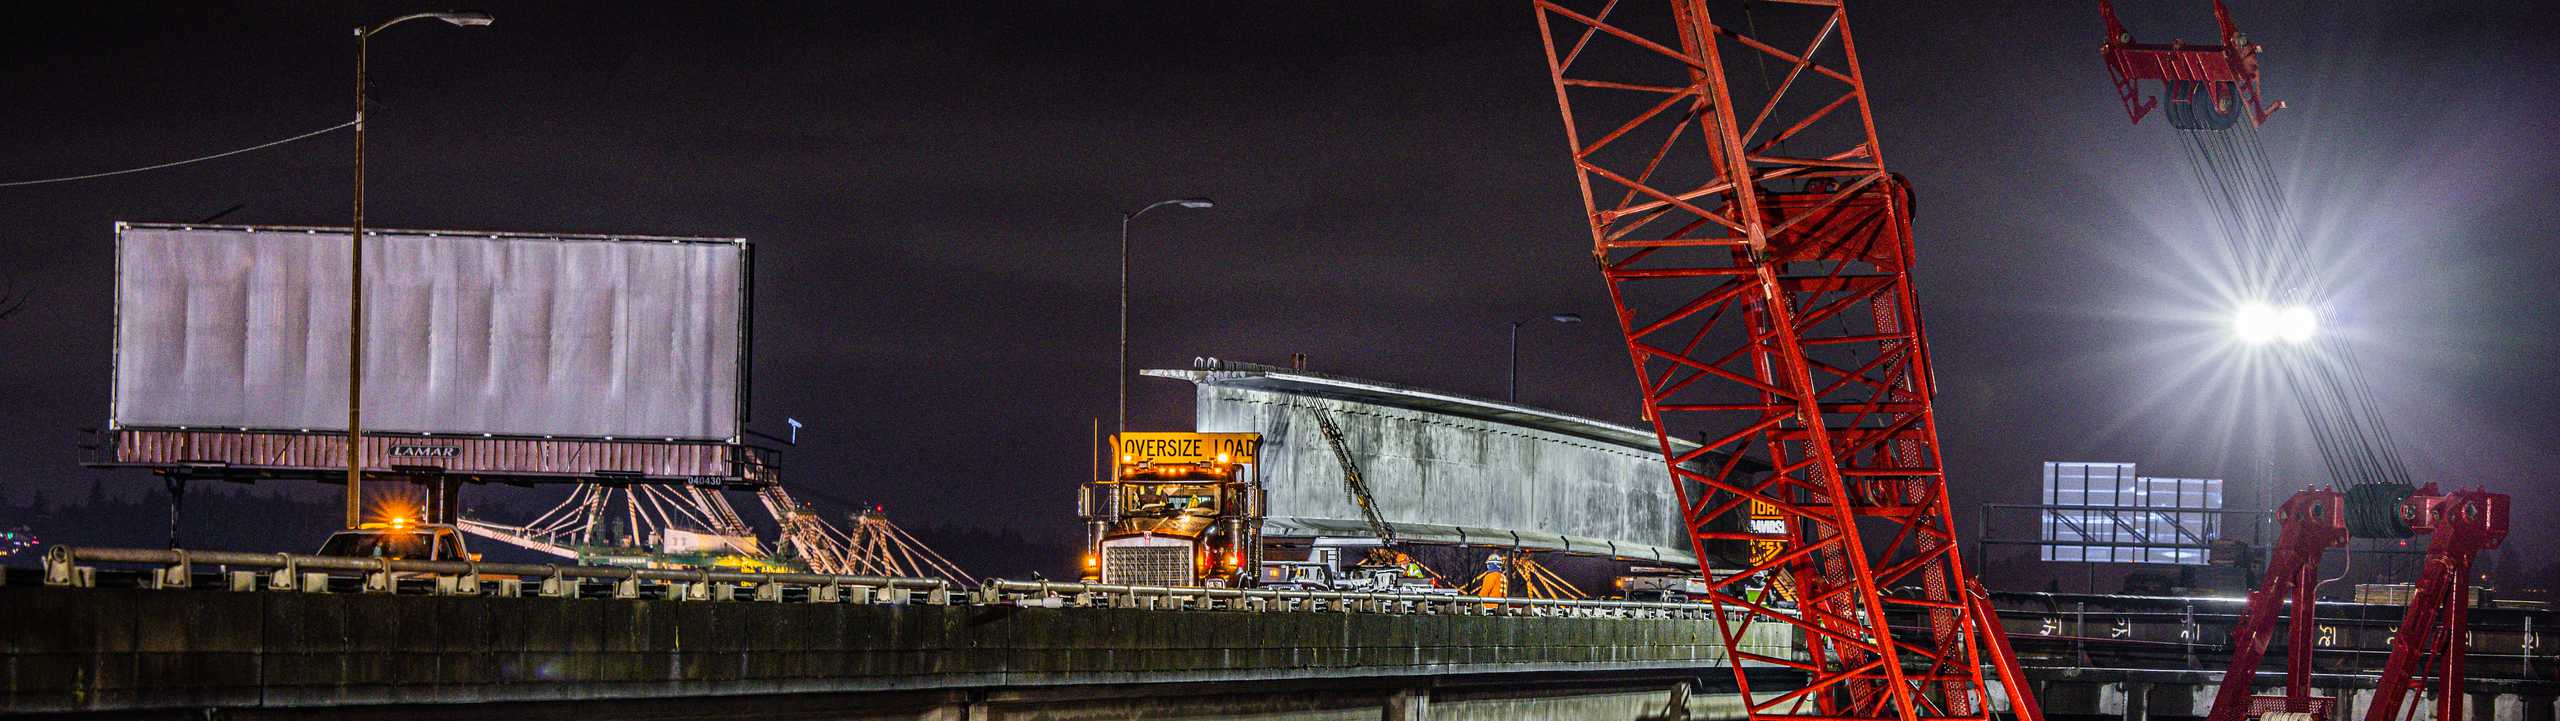 truck with girder for Puyallup bridge